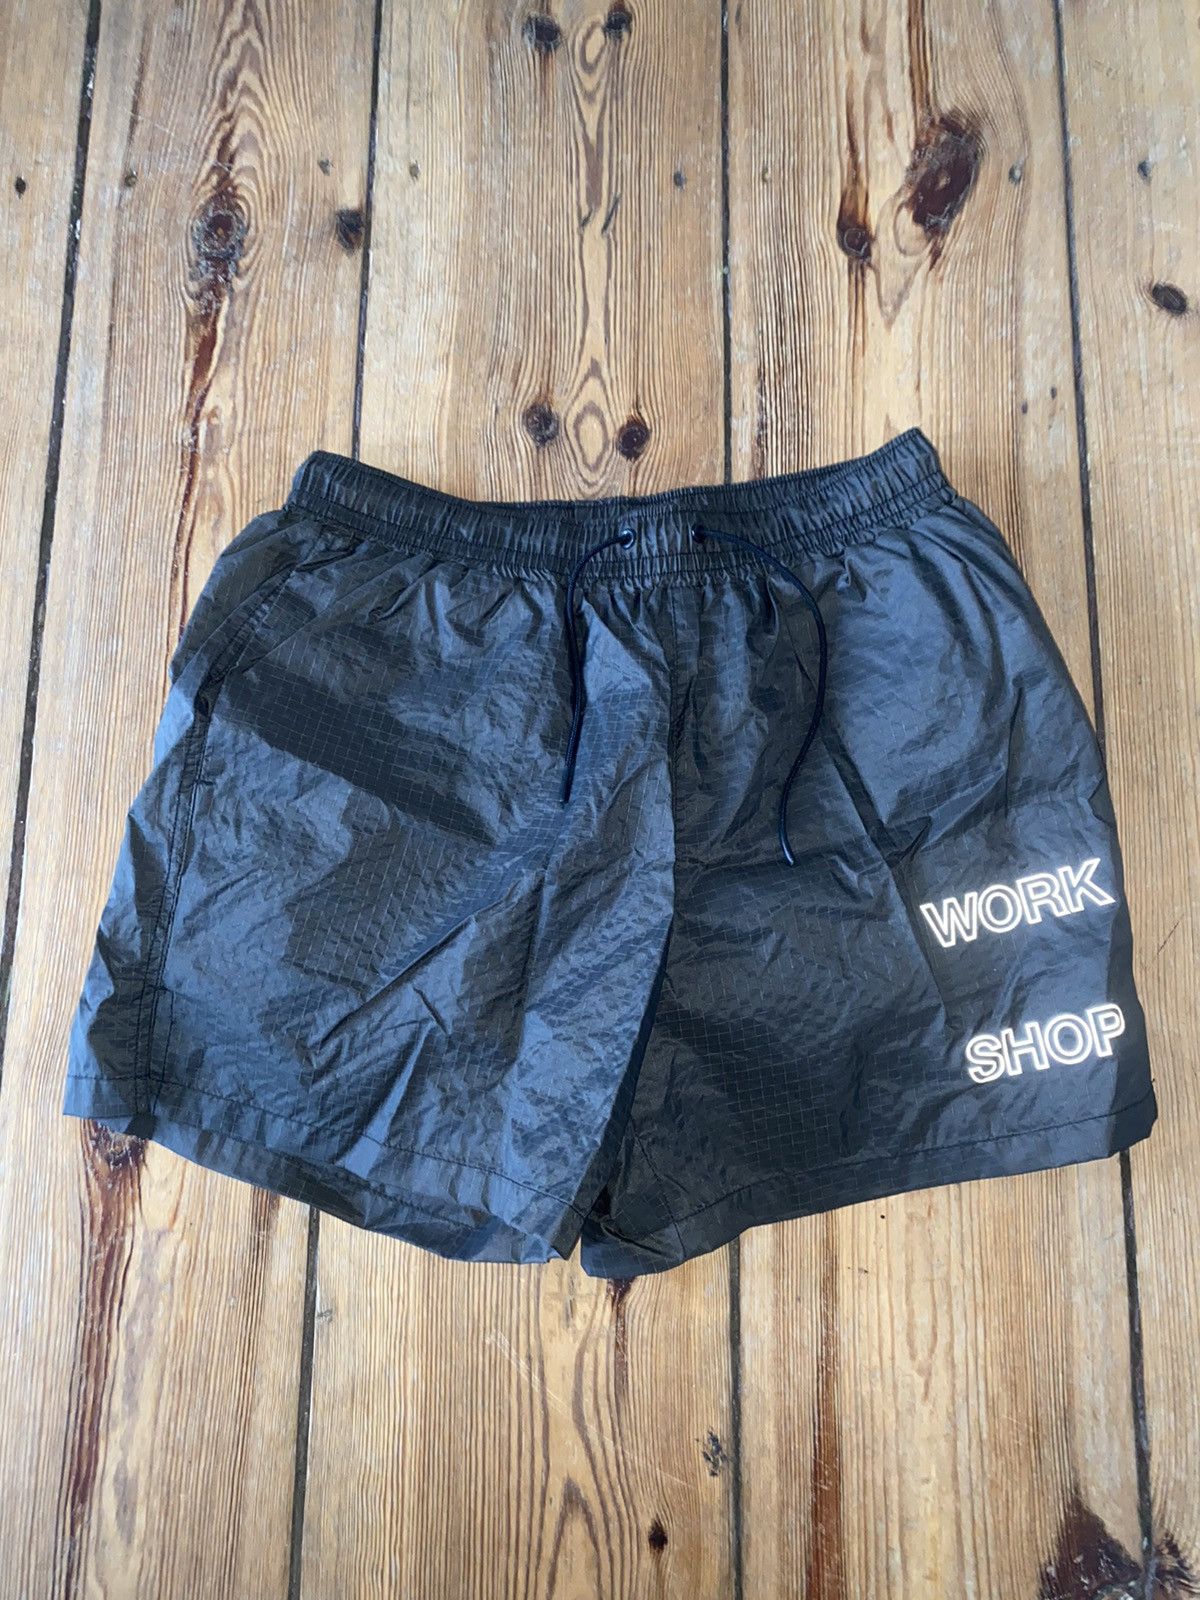 Our Legacy Our Legacy Workshop Running Shorts | Grailed